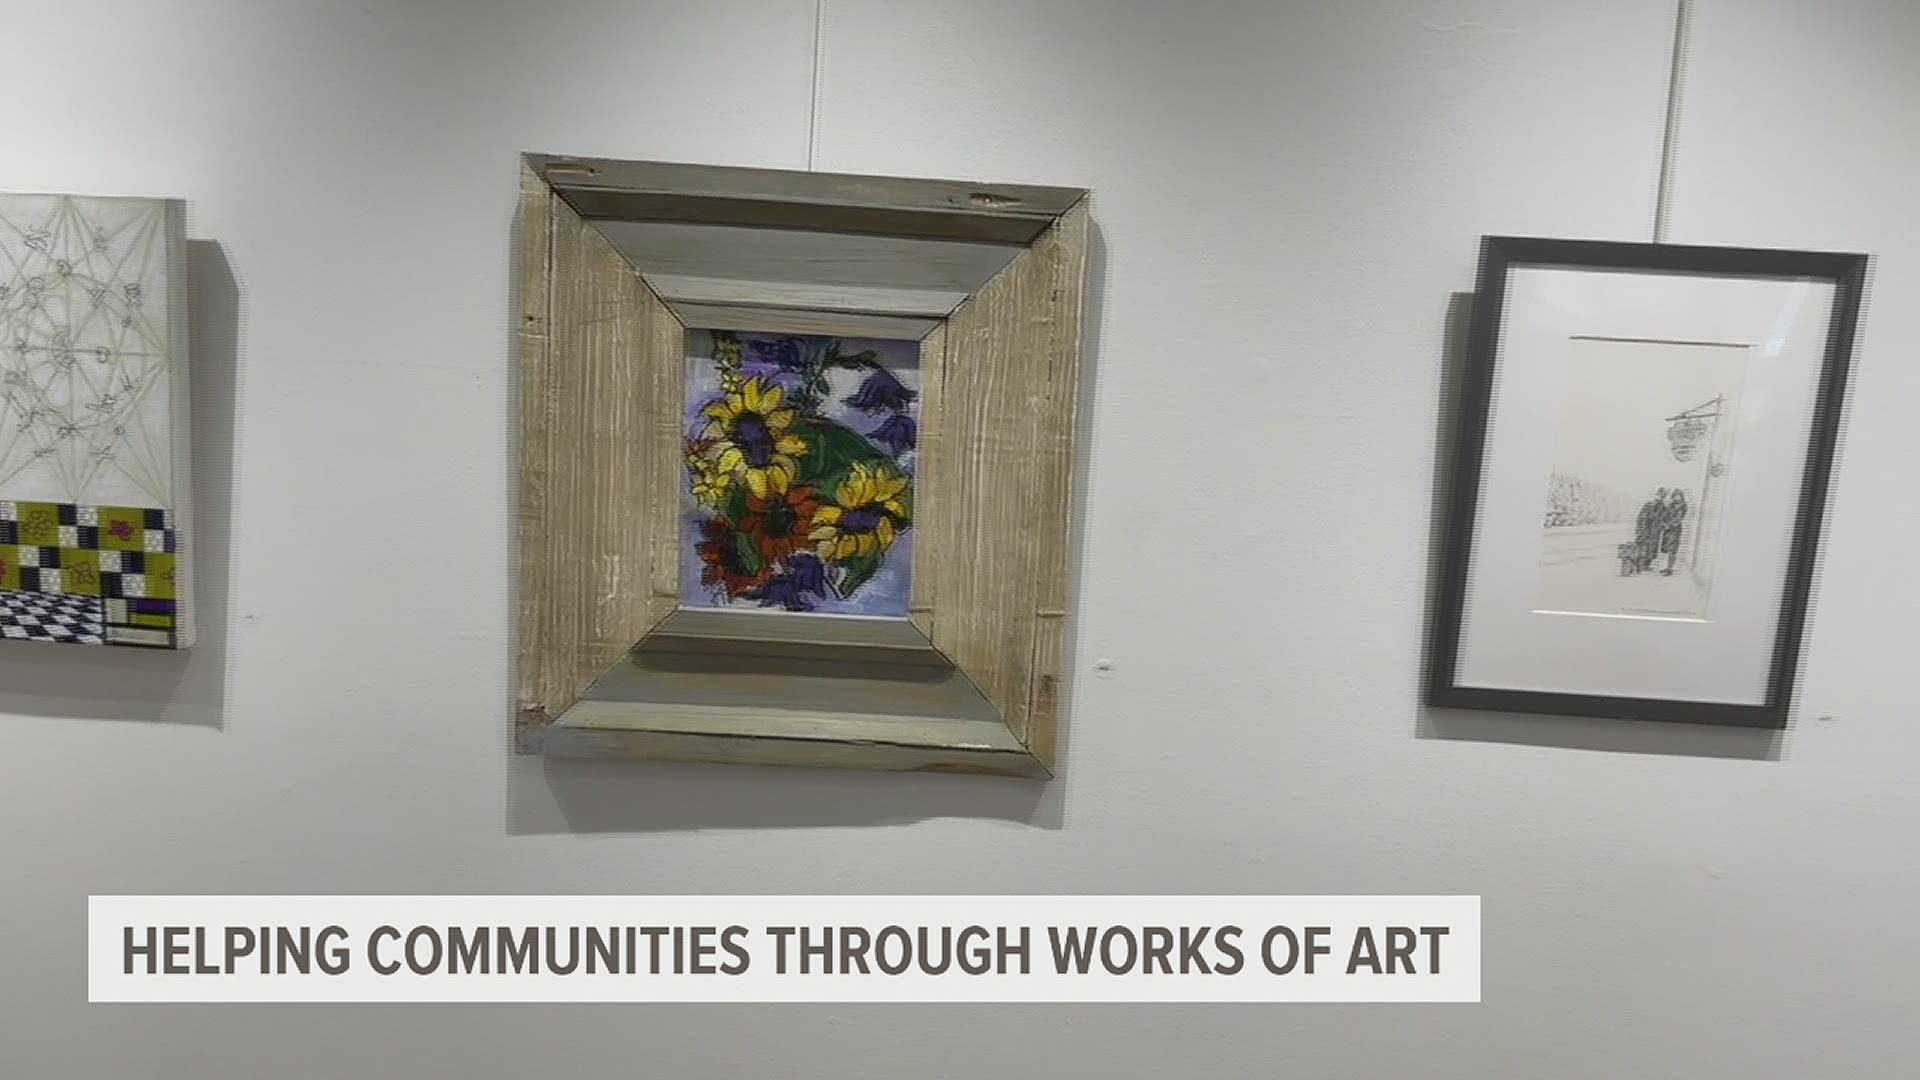 Creative York is showcasing "Art with Heart." Funds from the nine day virtual silent auction will raise money for outreach programs and children in the community.